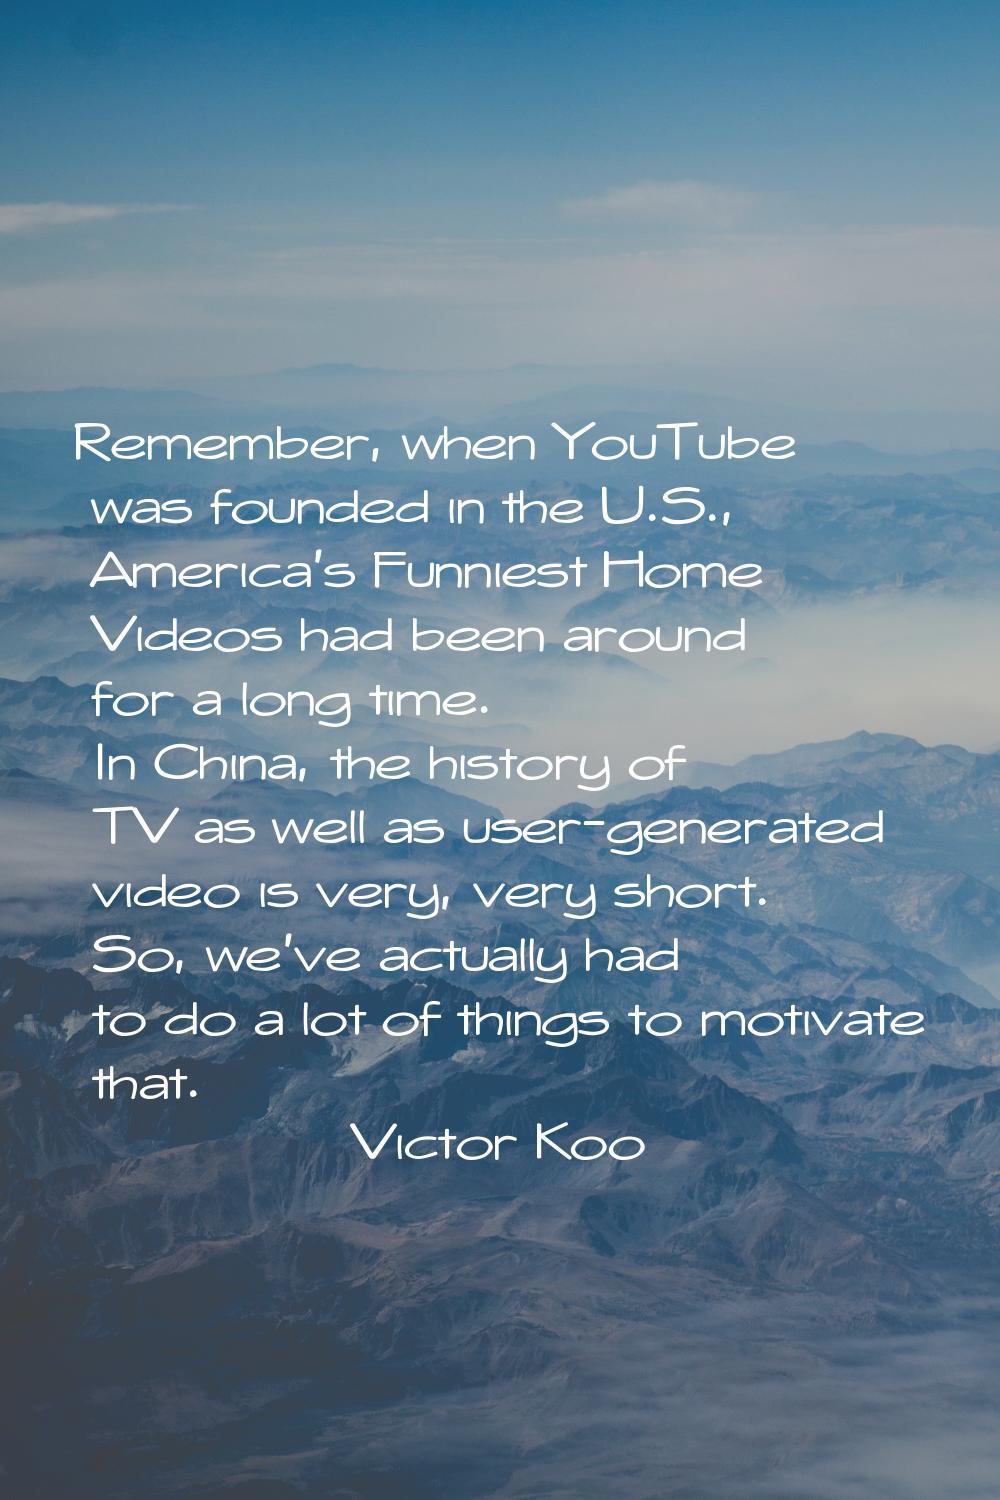 Remember, when YouTube was founded in the U.S., America's Funniest Home Videos had been around for 